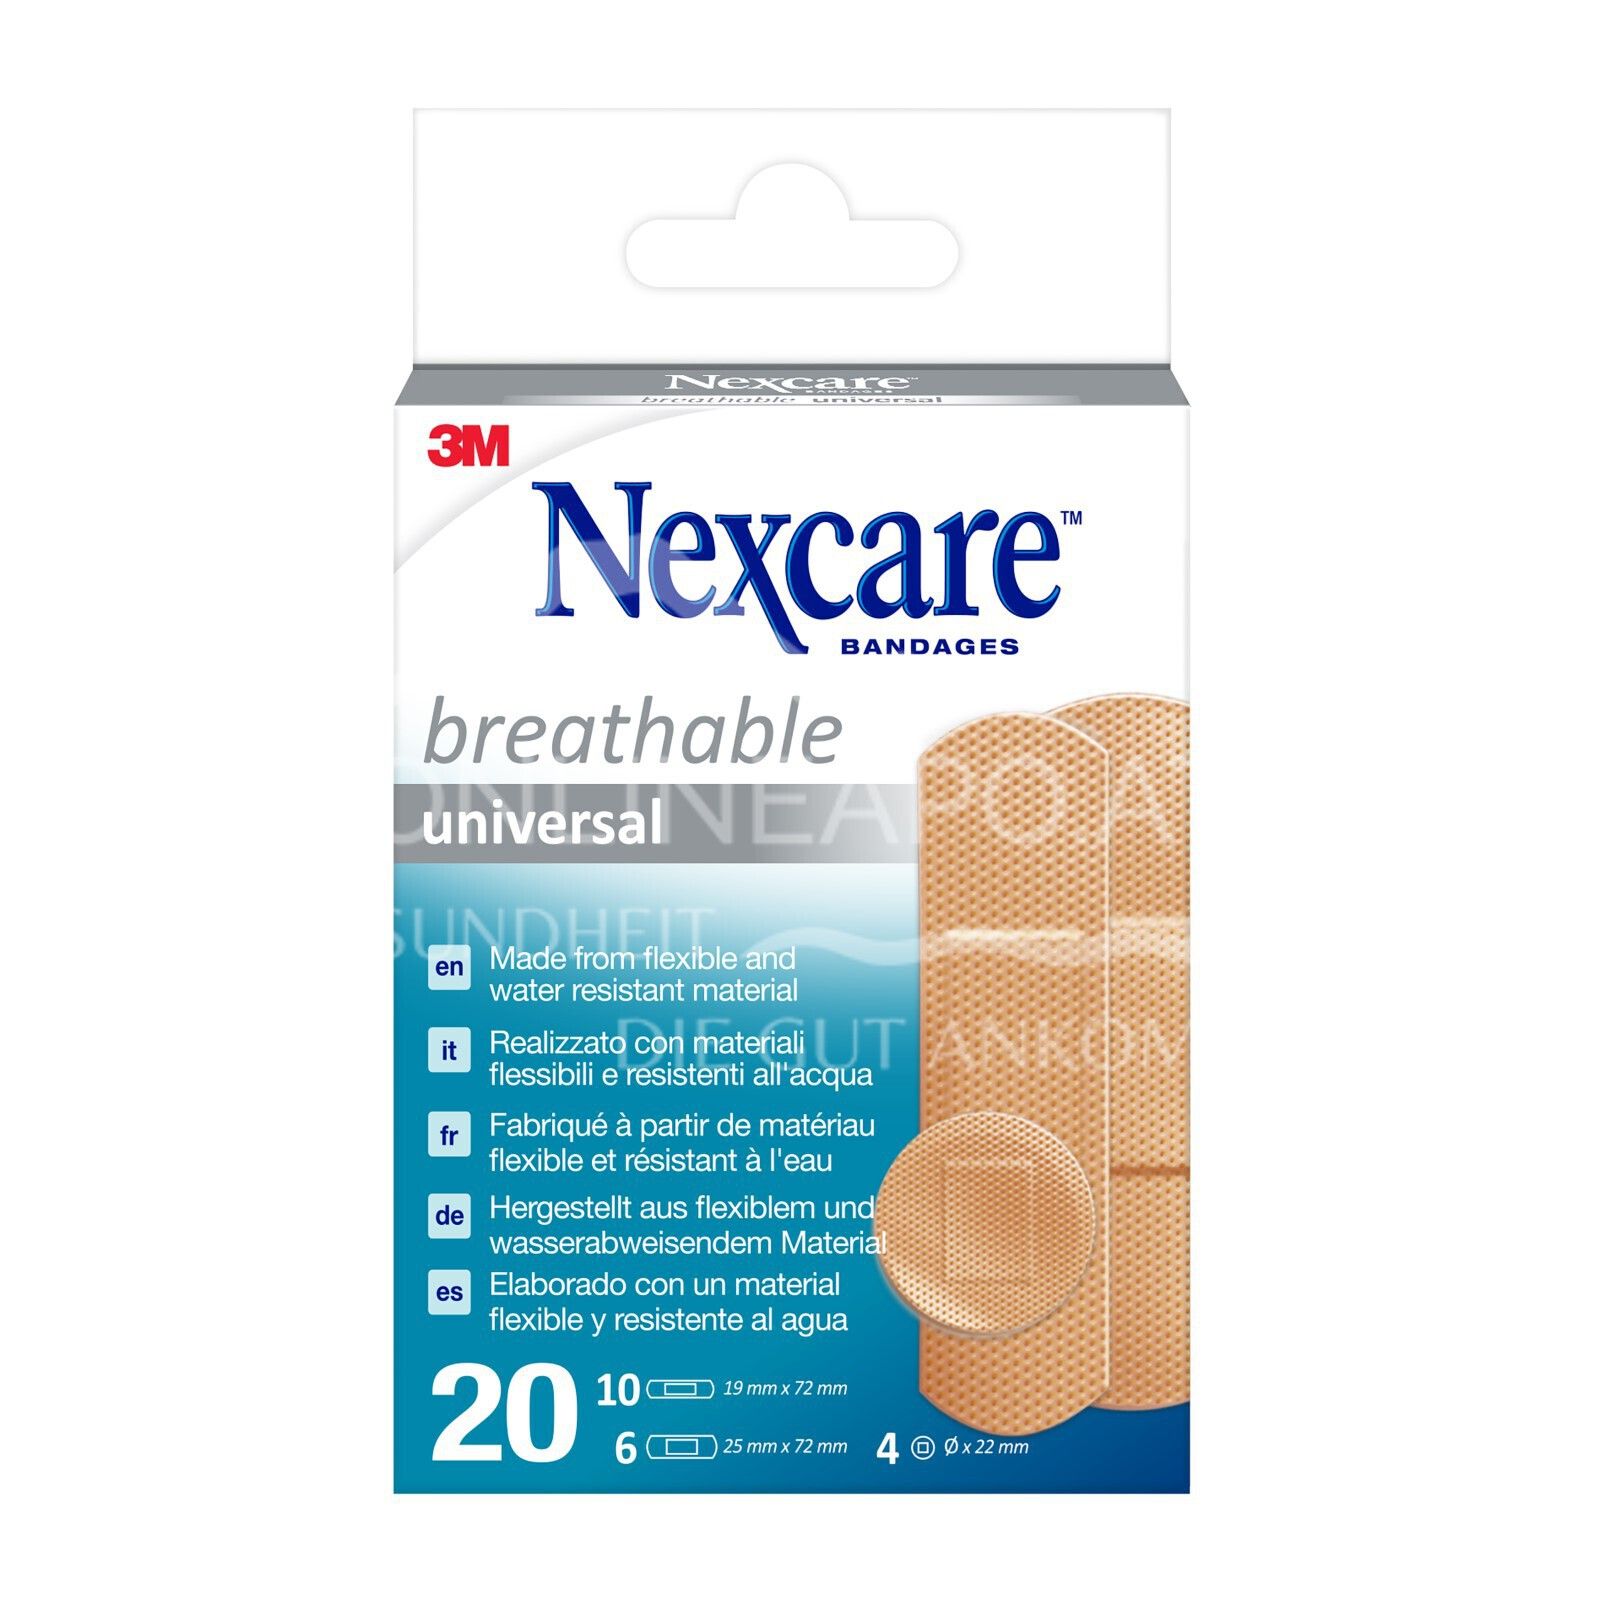 3M Nexcare™ Breathable Universal Pflaster, assortiert